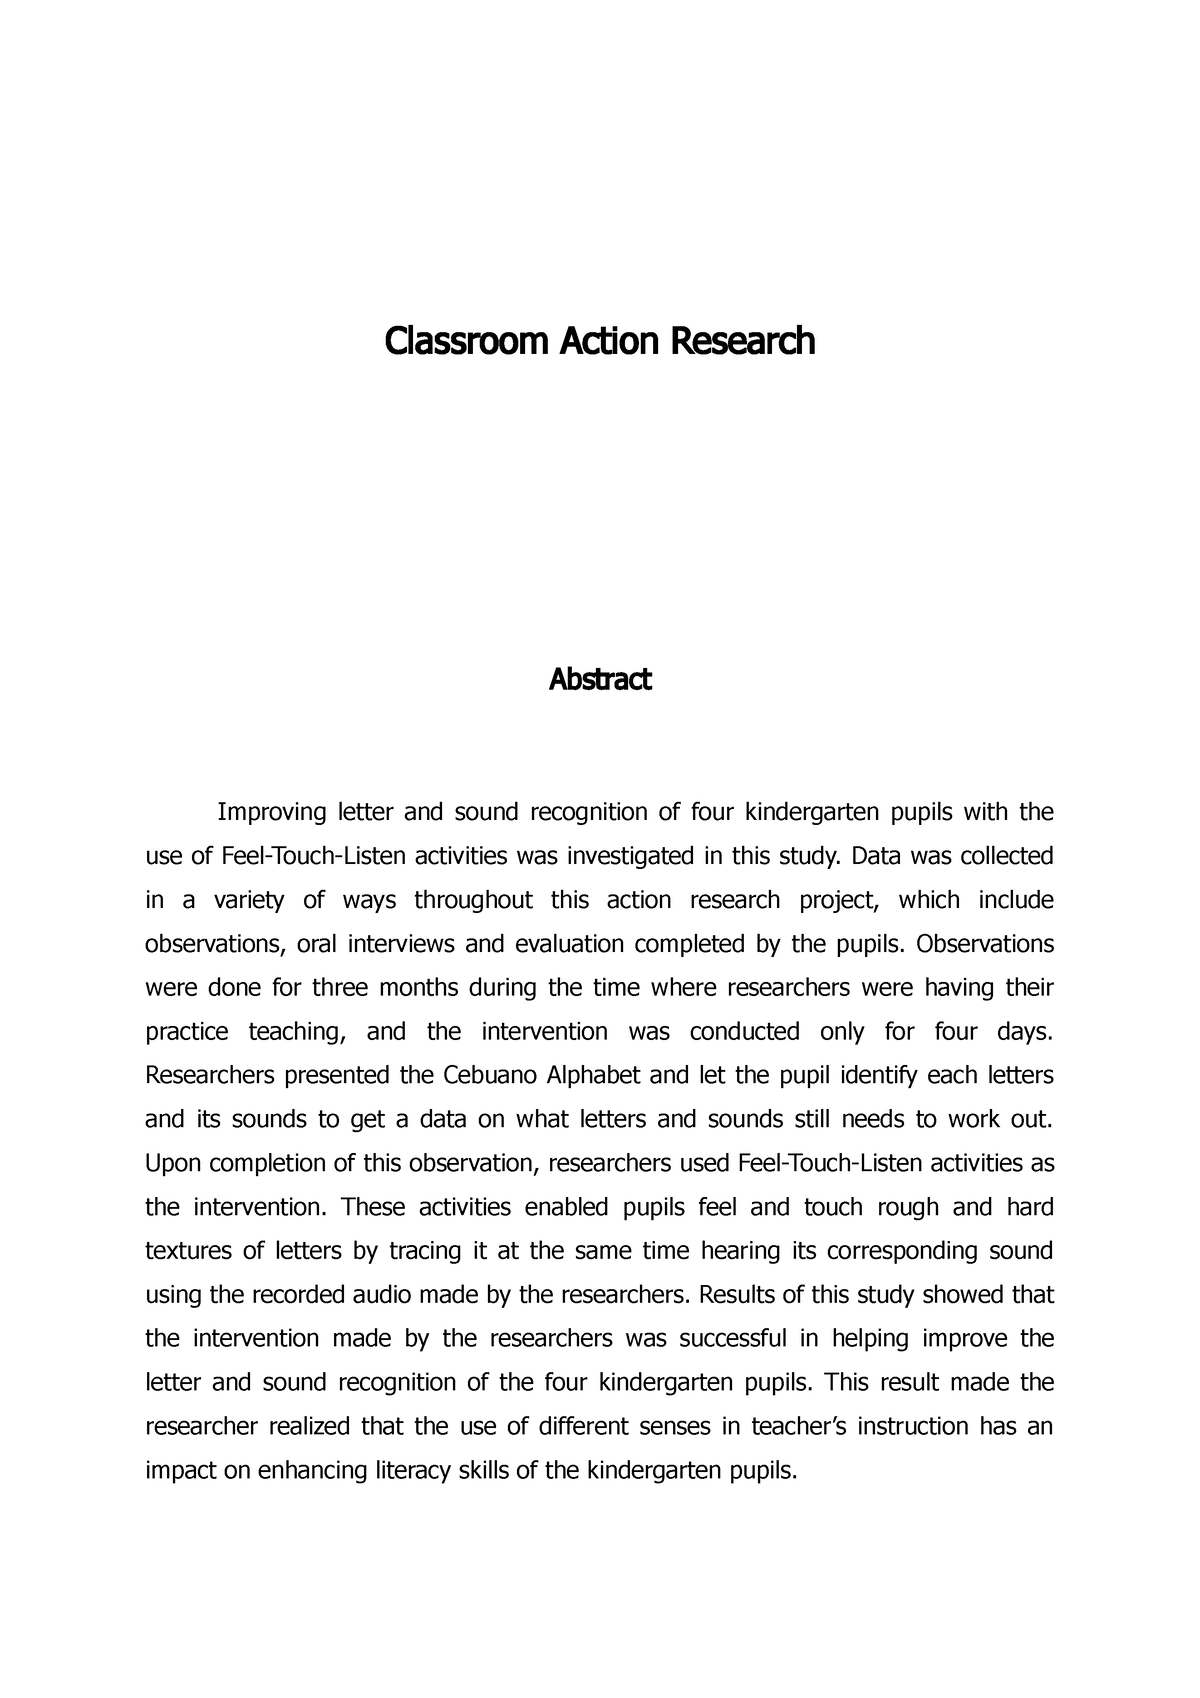 what is abstract in action research